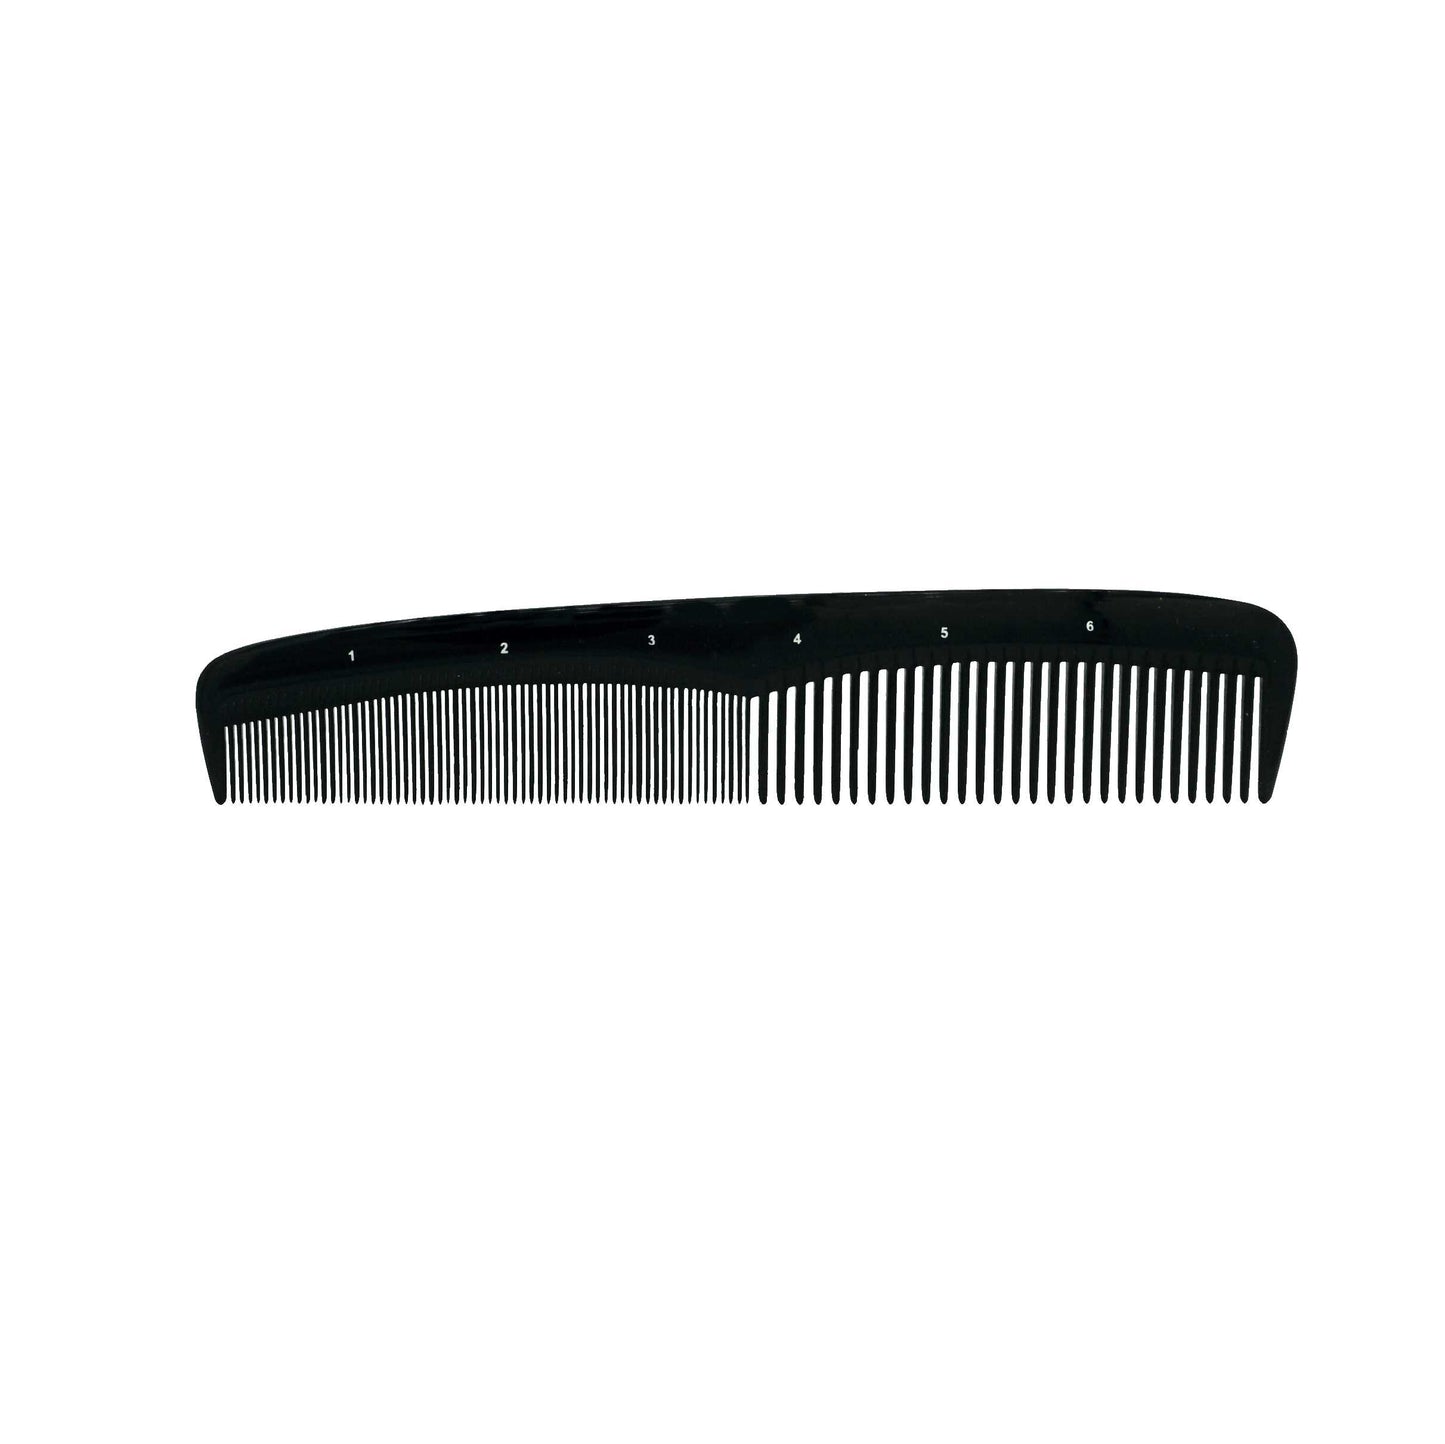 Pegasus 606, 7in Styling Comb with Inch Marks, Handmade, Seamless, Smooth Edges, Anti Static, Heat and Chemically Resistant, Portable Pocket Purse Dresser Comb | Peines de goma dura - Black